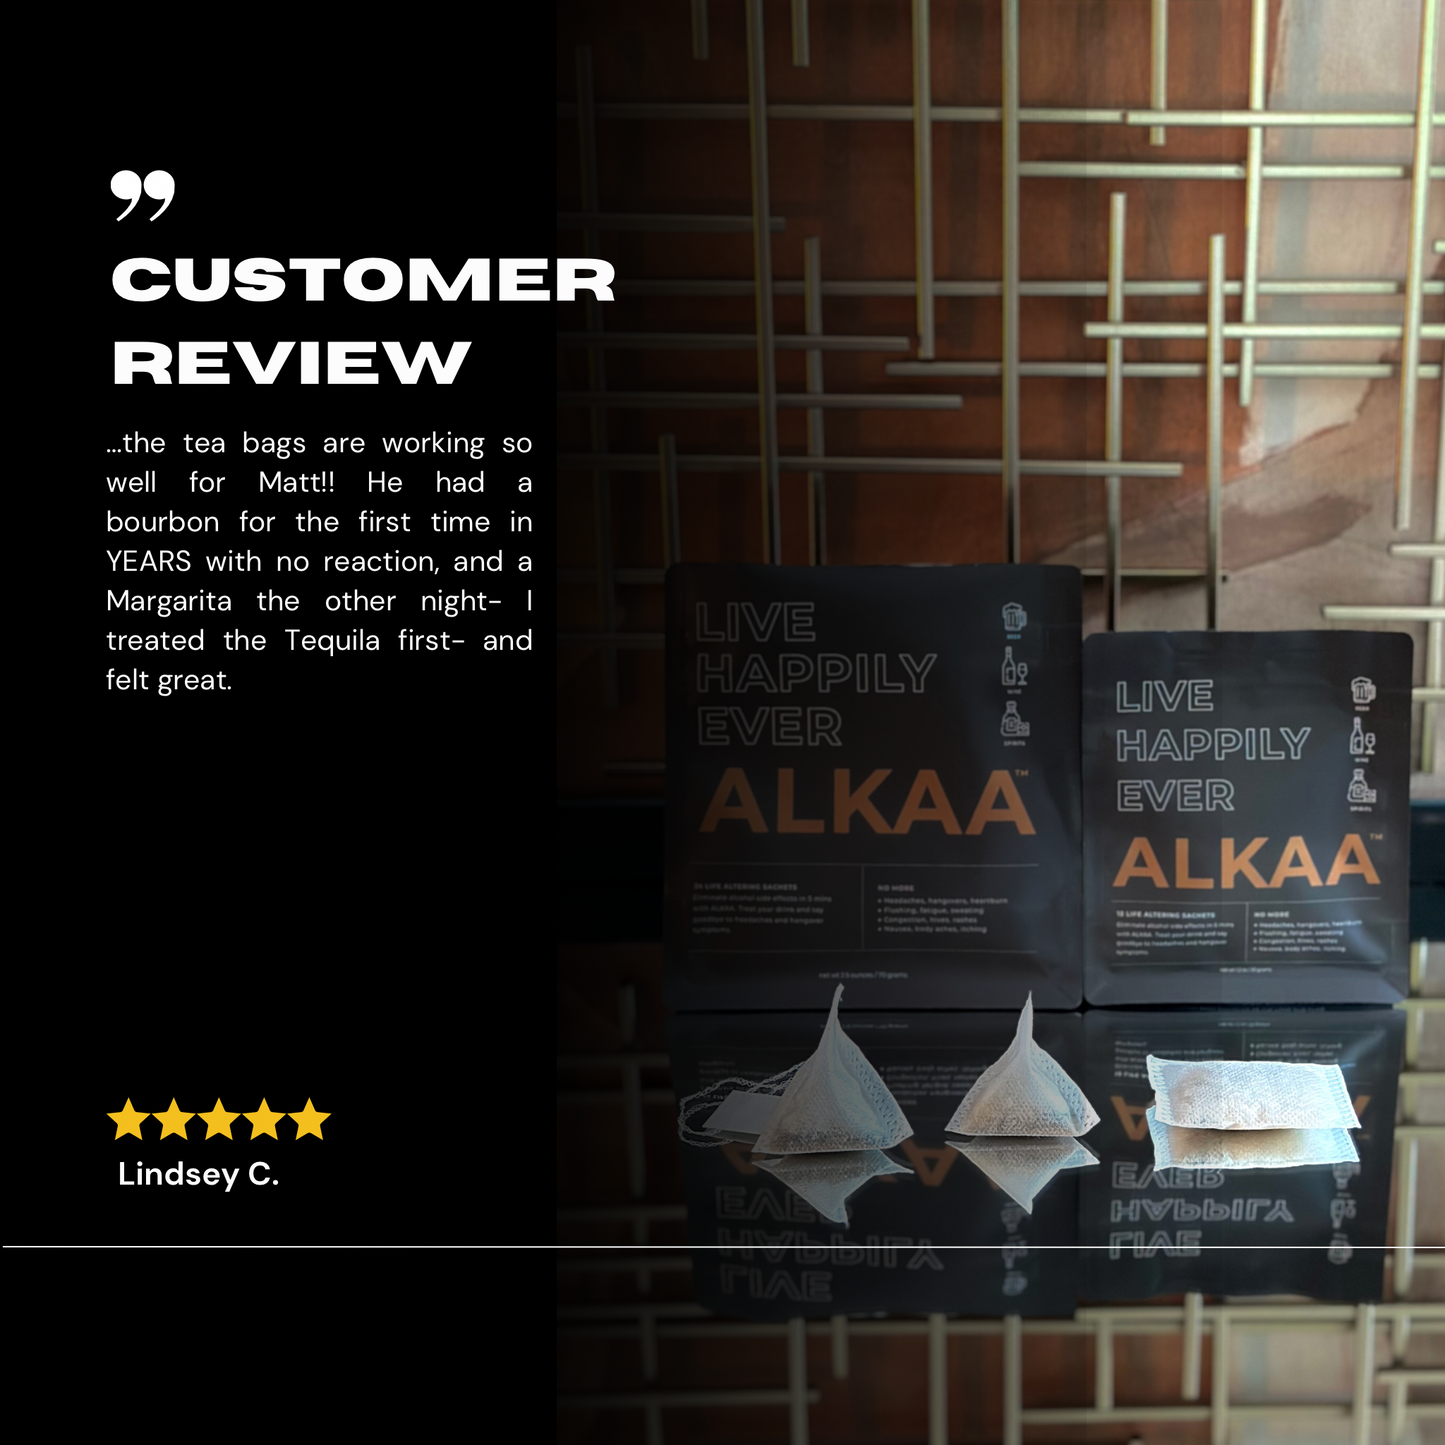 ALKAA sachet hangover prevention bags front and rear. Testimonial. Hangover cure, alcohol intolerance prevention